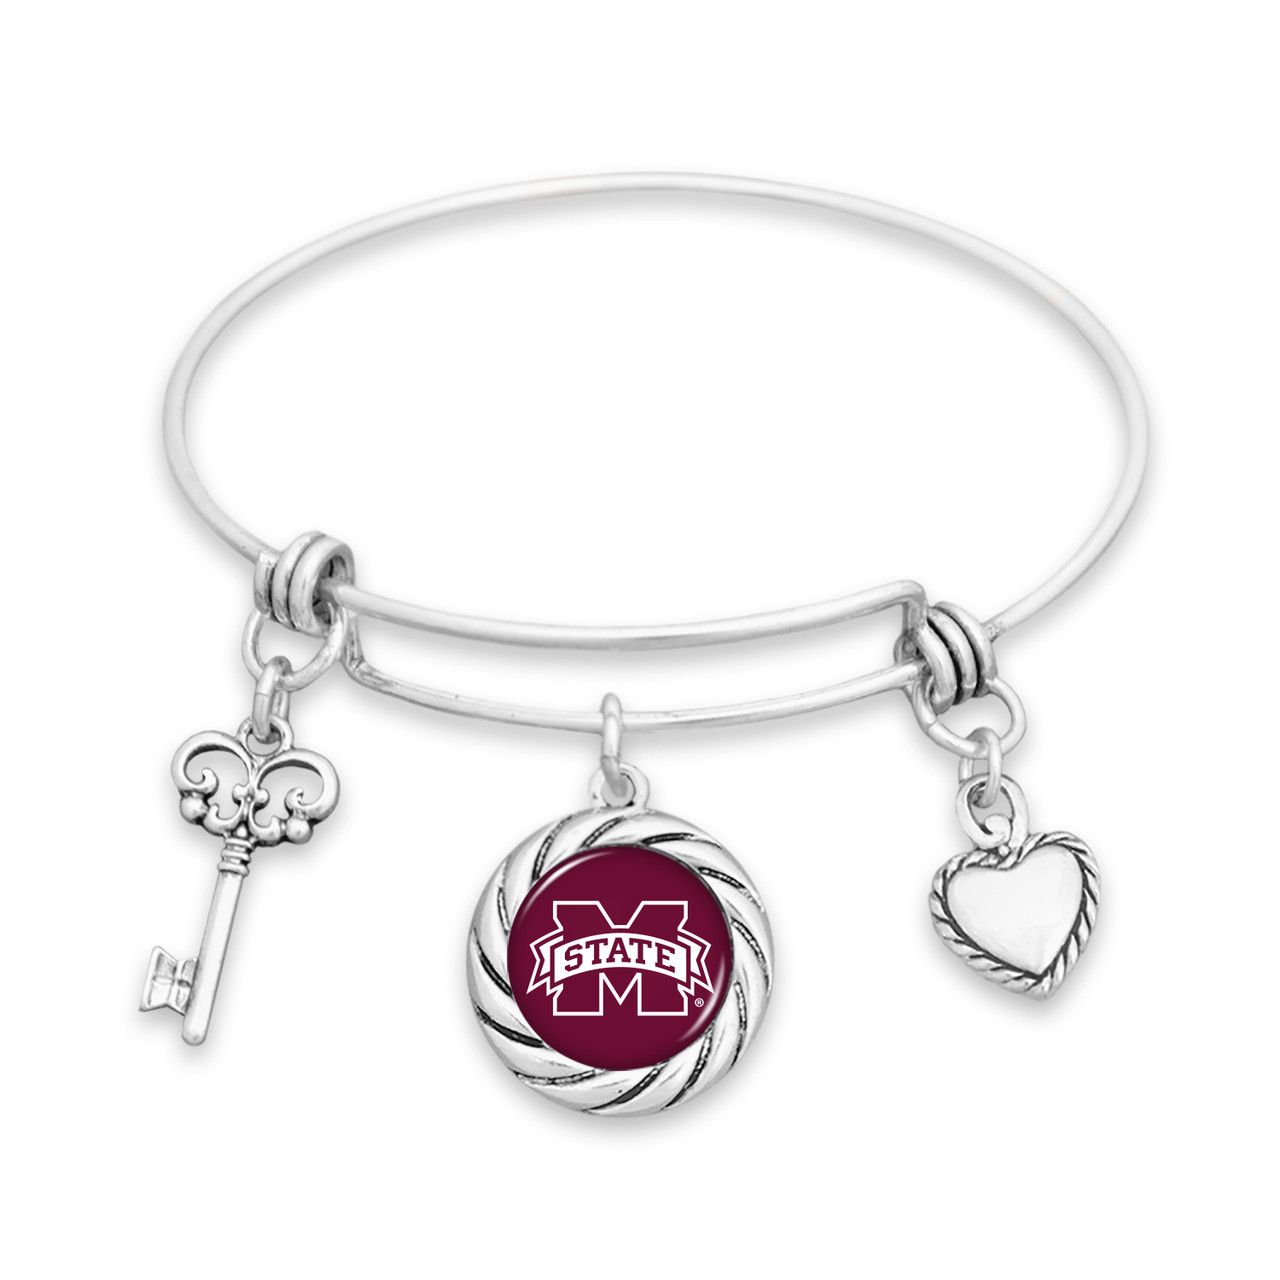 Mississippi State Bulldogs Bracelet- Twisted Rope